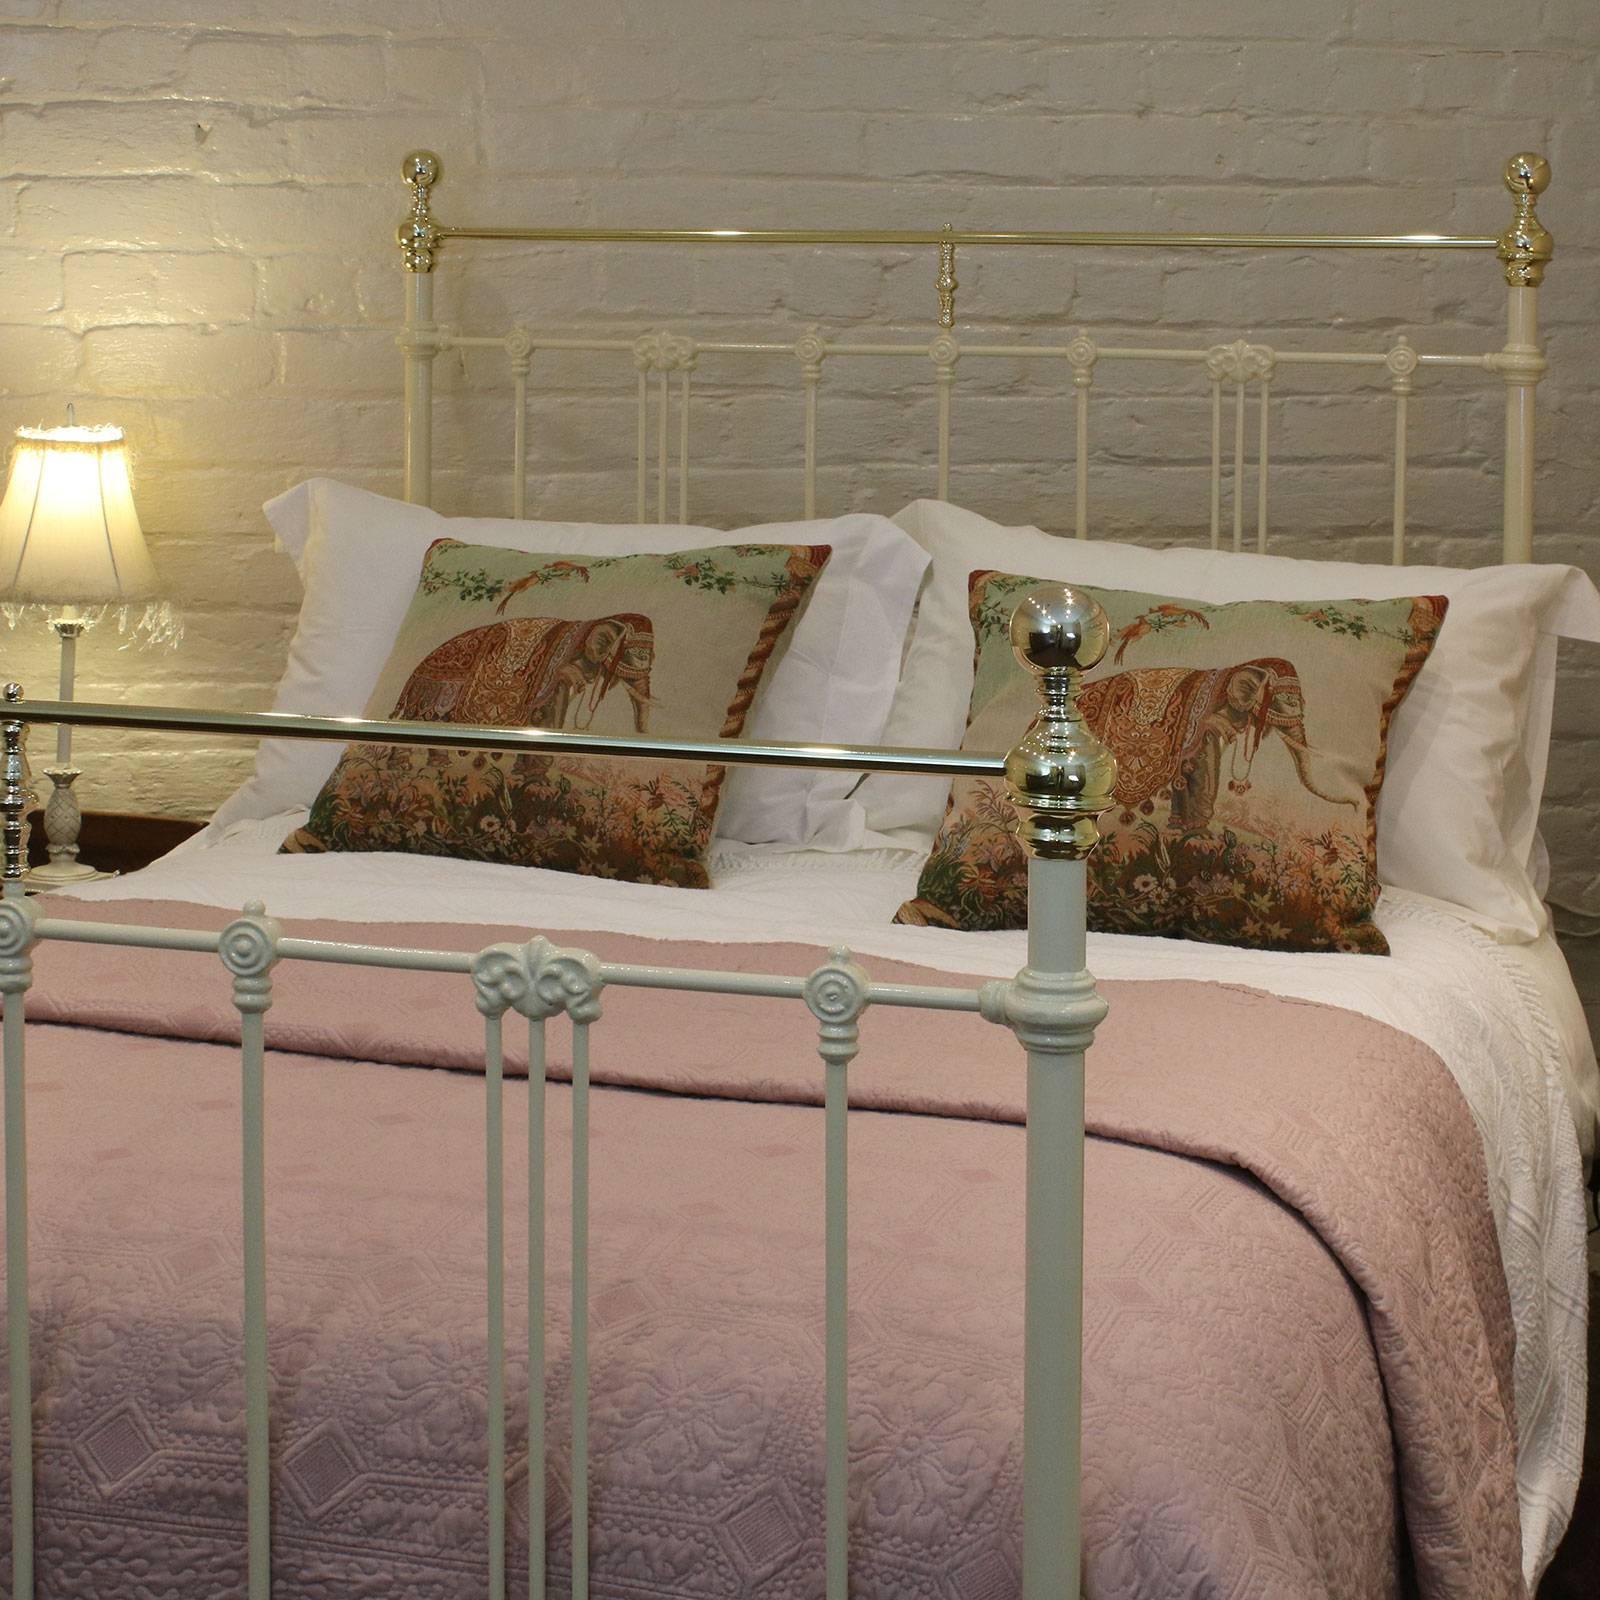 A brass and iron bedstead finished in cream with brass straight top rails and Art Nouveau style castings, circa 1900.

This bed accepts a double size base and mattress (54 inches, 4ft 6in or 135 cm).

The price is for the bed frame alone - the